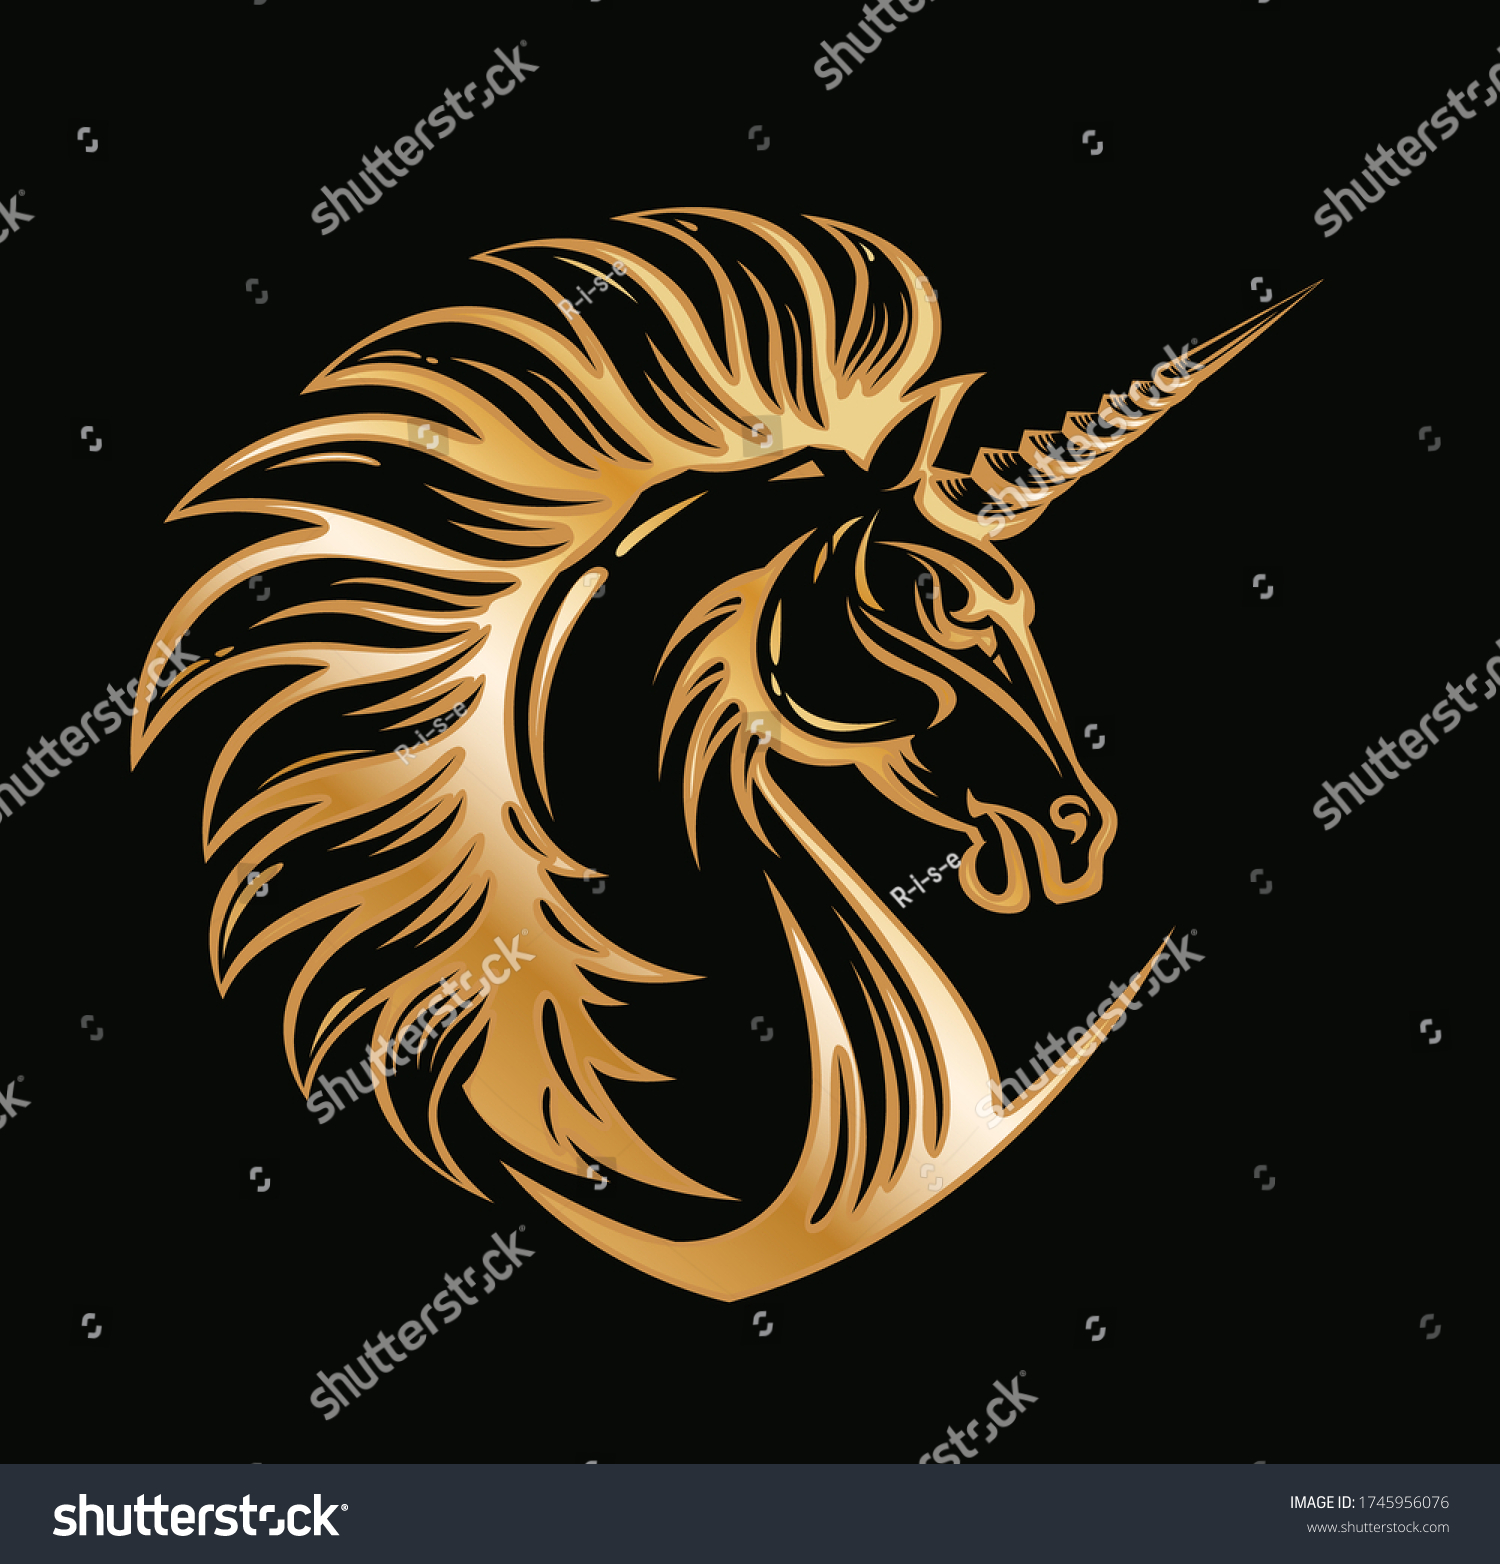 SVG of Angry Unicorn head. Golden emblem. Fury Magic animal glitter illustration. Vector art for icon, apparel print, insignia, mascot, sport or game team emblem, fairy tale book svg